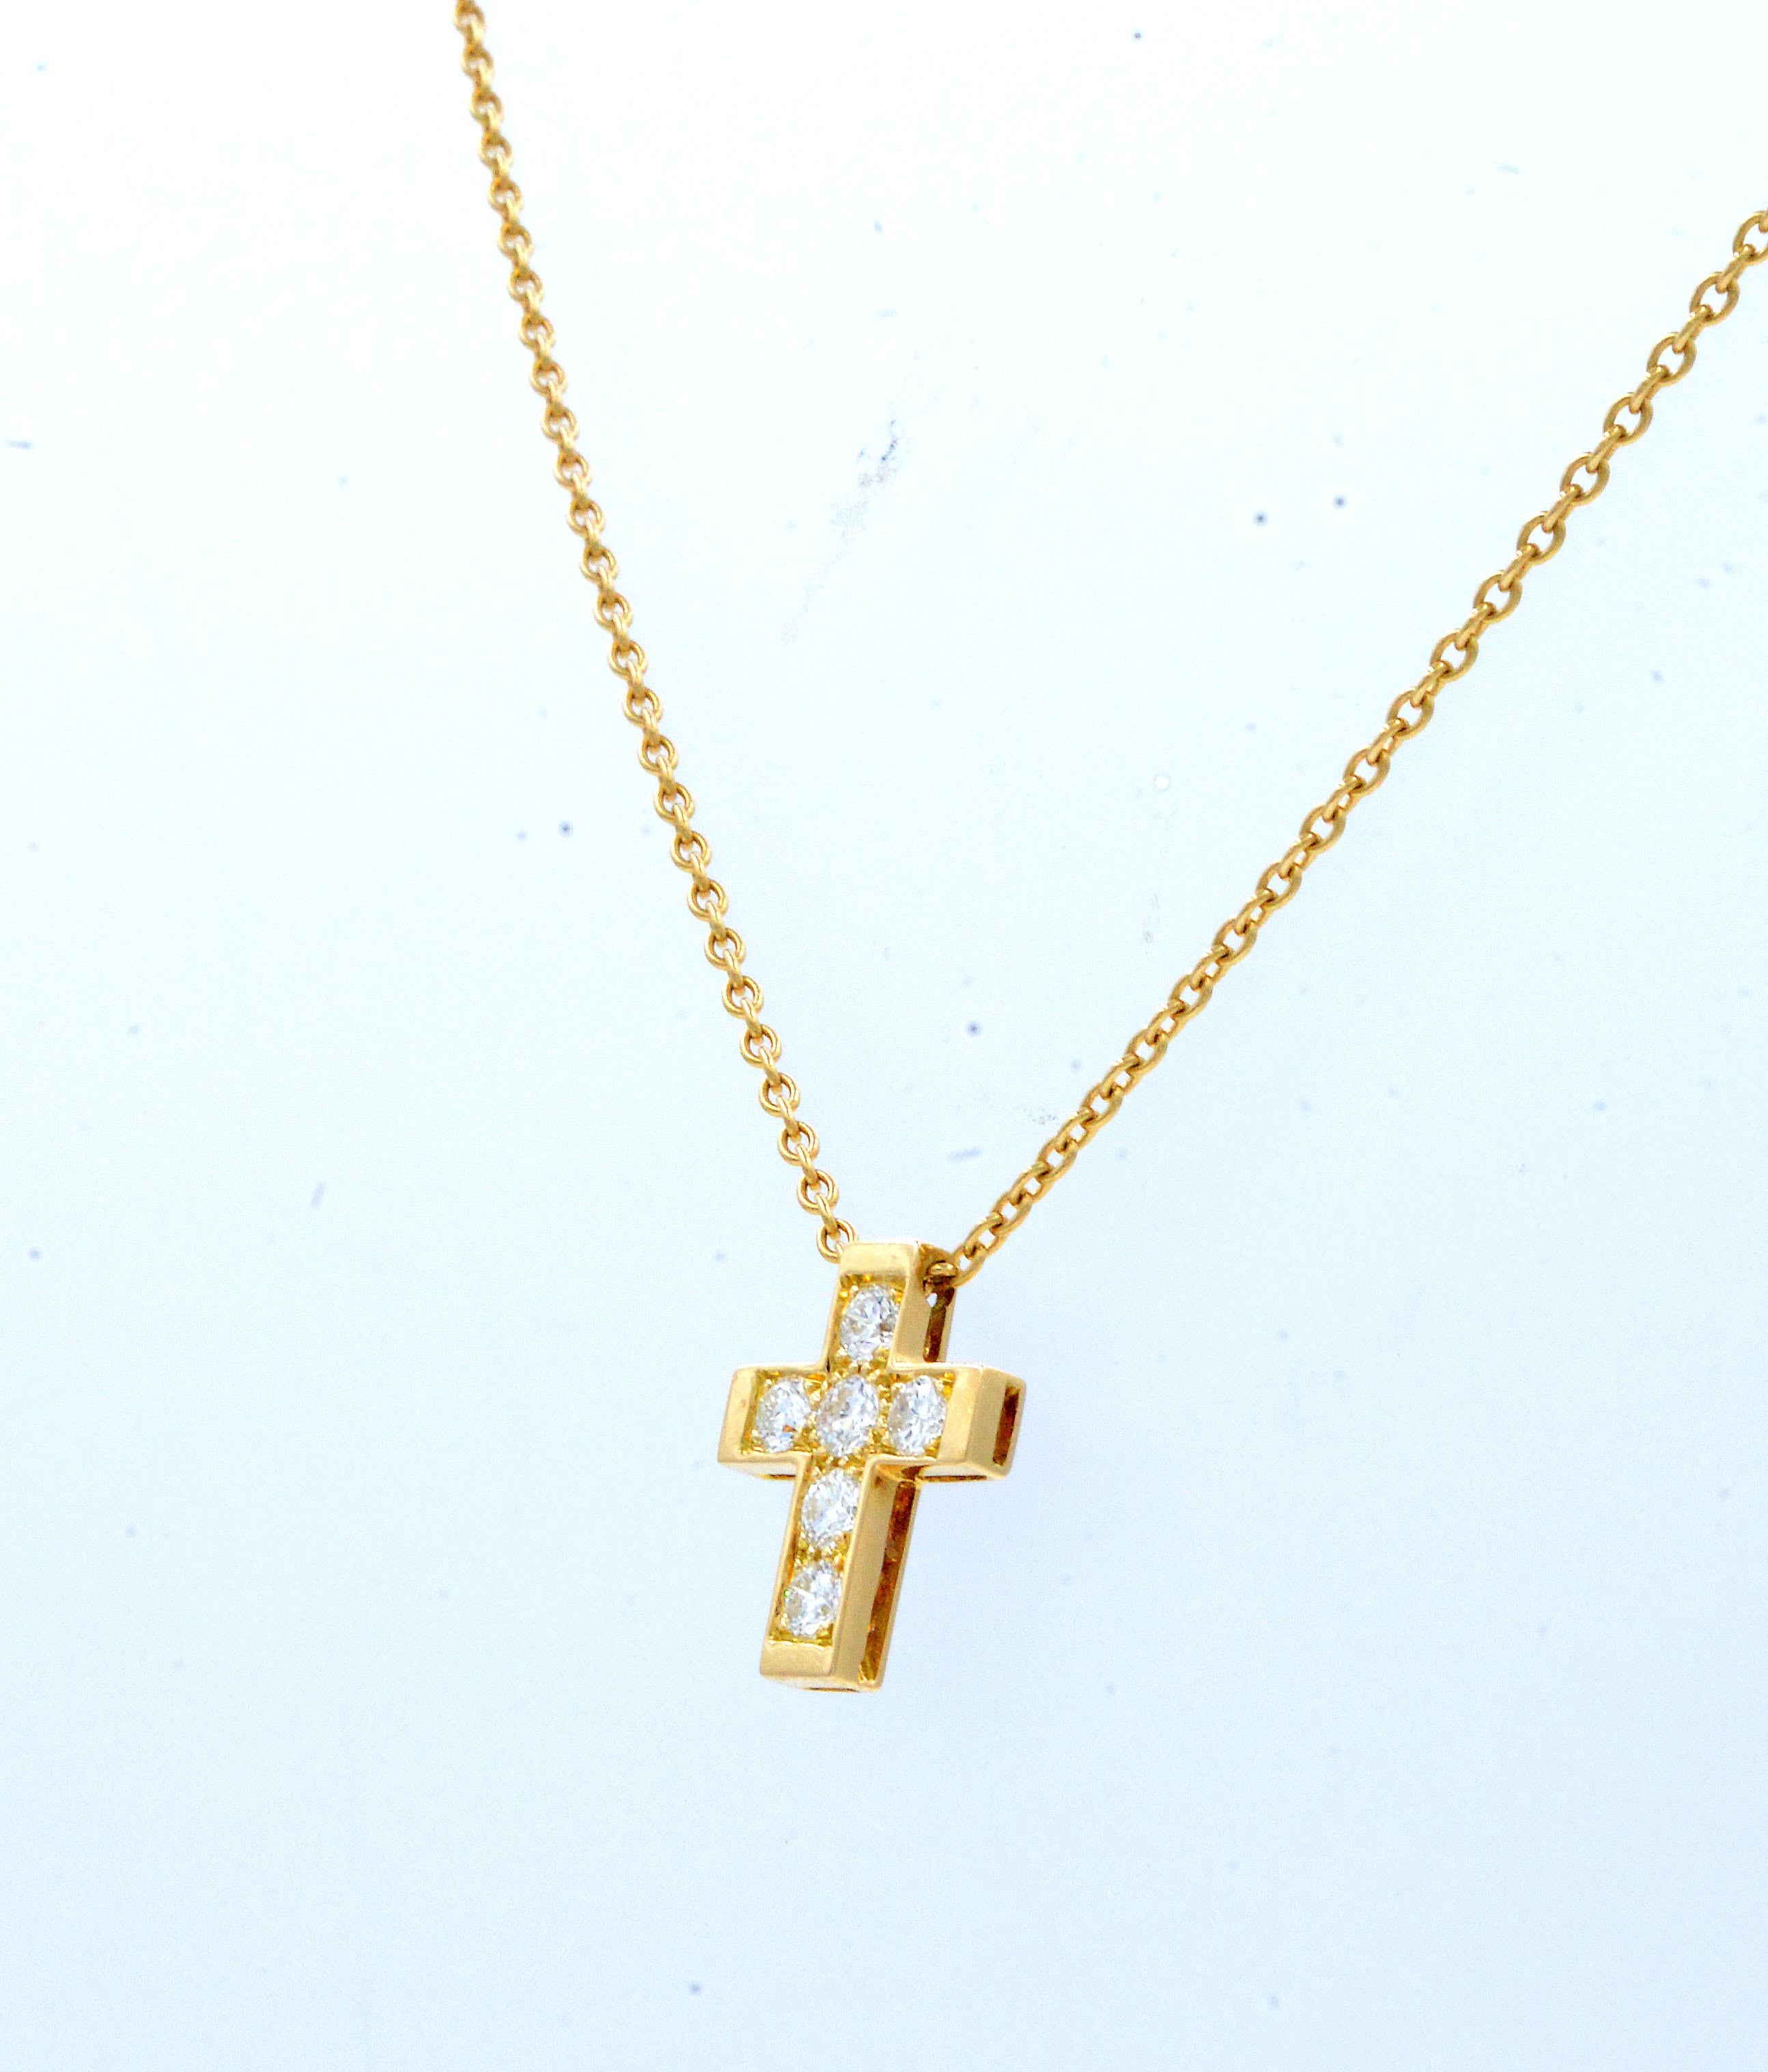 Van Cleef & Arpels 18K Yellow Gold Diamond Cross Pendant Necklace 0.24 Cttw

Van Cleef & Arpels VS1 Diamond cross necklace in 18k gold in good condition.

Cross Length: 12mm

Chain Lenght............................... 16 or 18 inches long.

Diamond